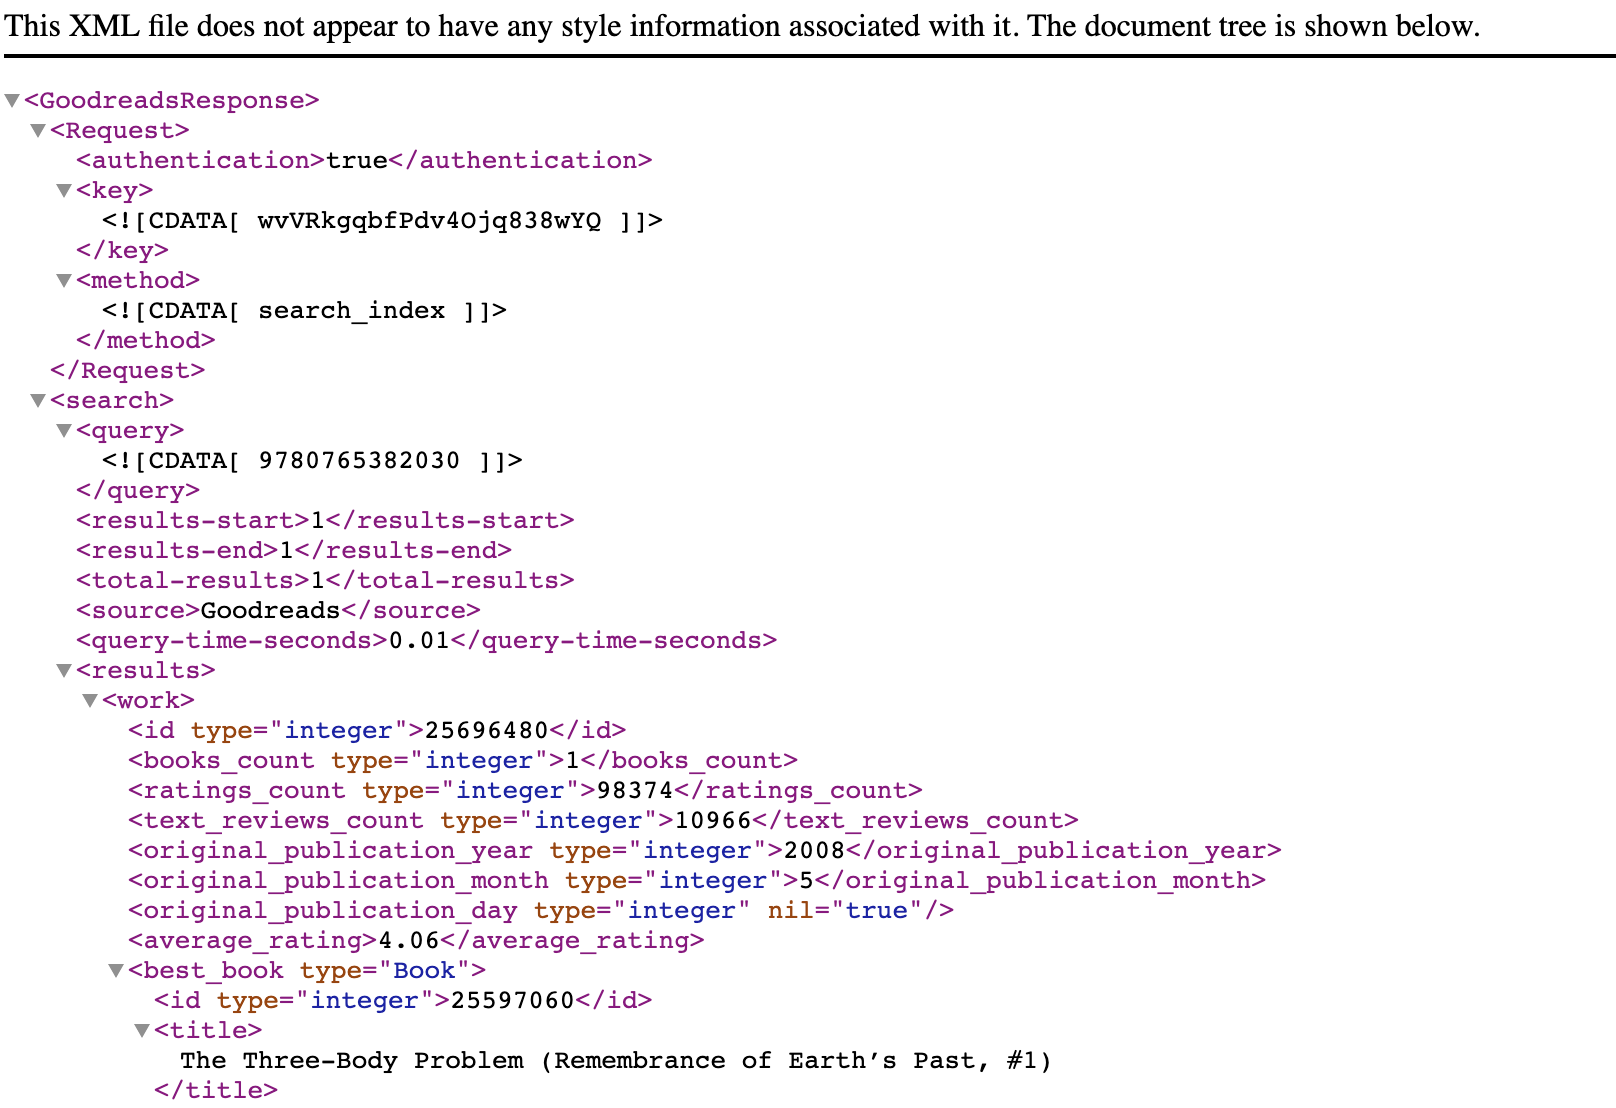 A snapshot of typical XML result returned from Goodreads search.books API